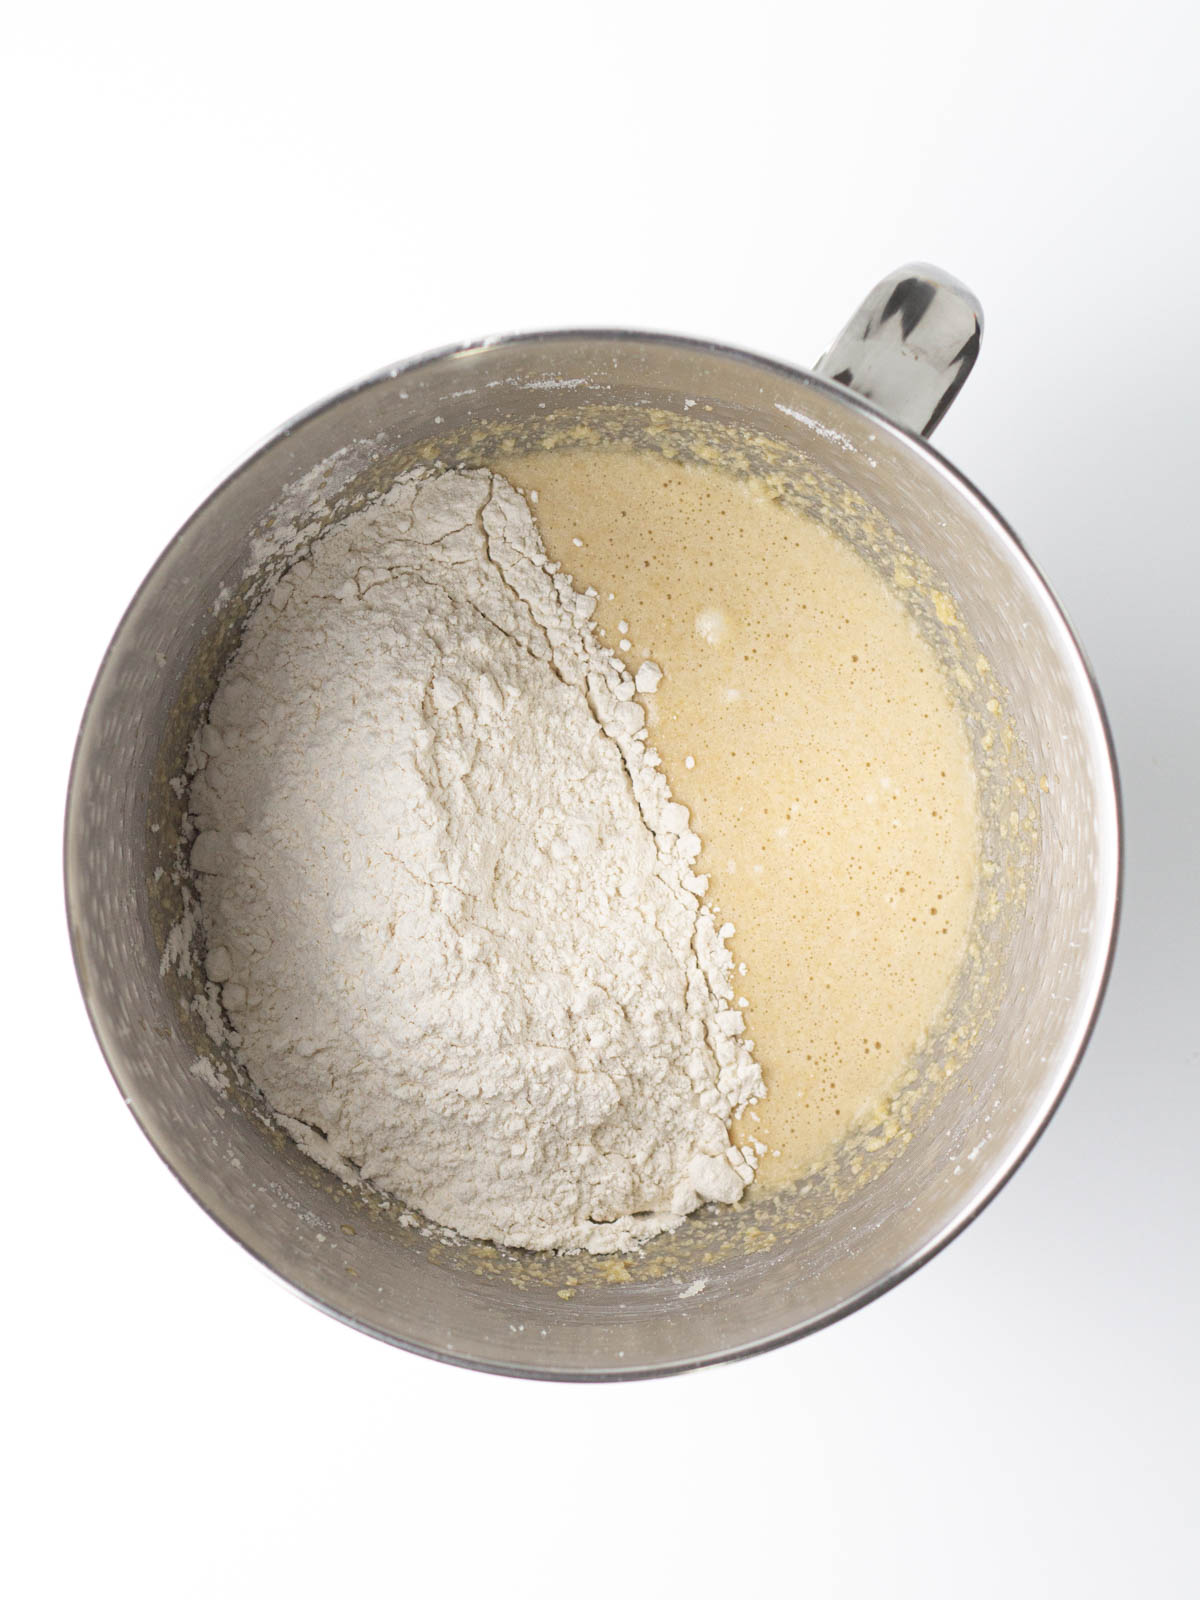 Flour sitting on top of chai bread batter in a silver mixing bowl.